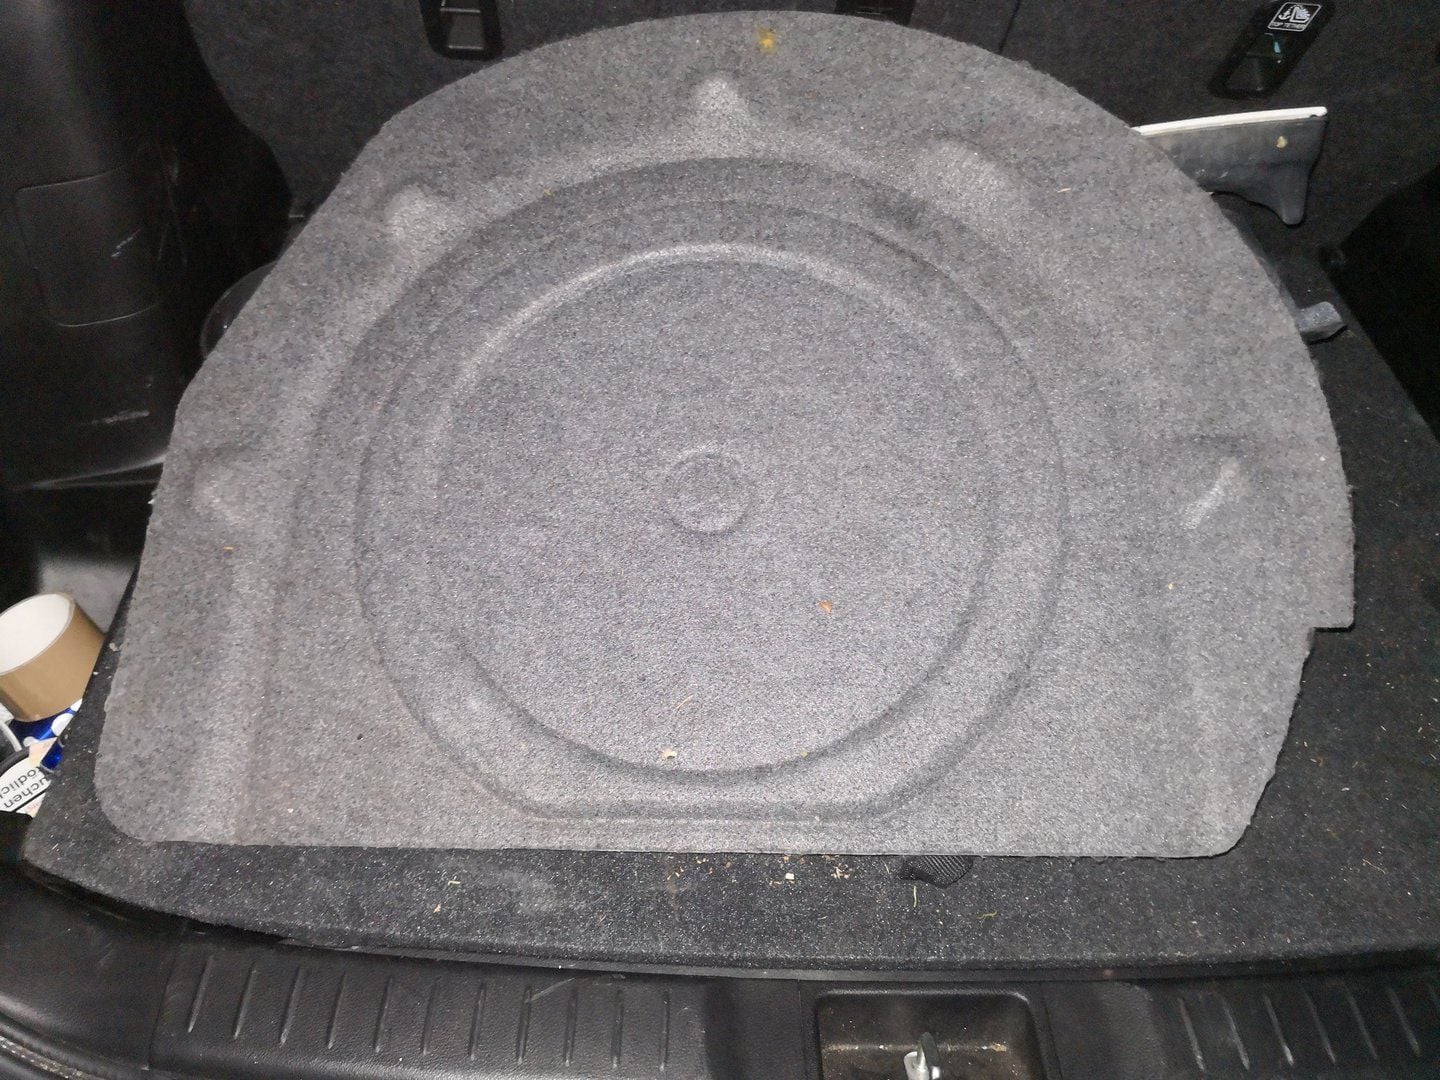 Interior/Upholstery - Spare Tire Cover - New or Used - 1993 to 2002 Mazda RX-7 - Austin, TX 78741, United States